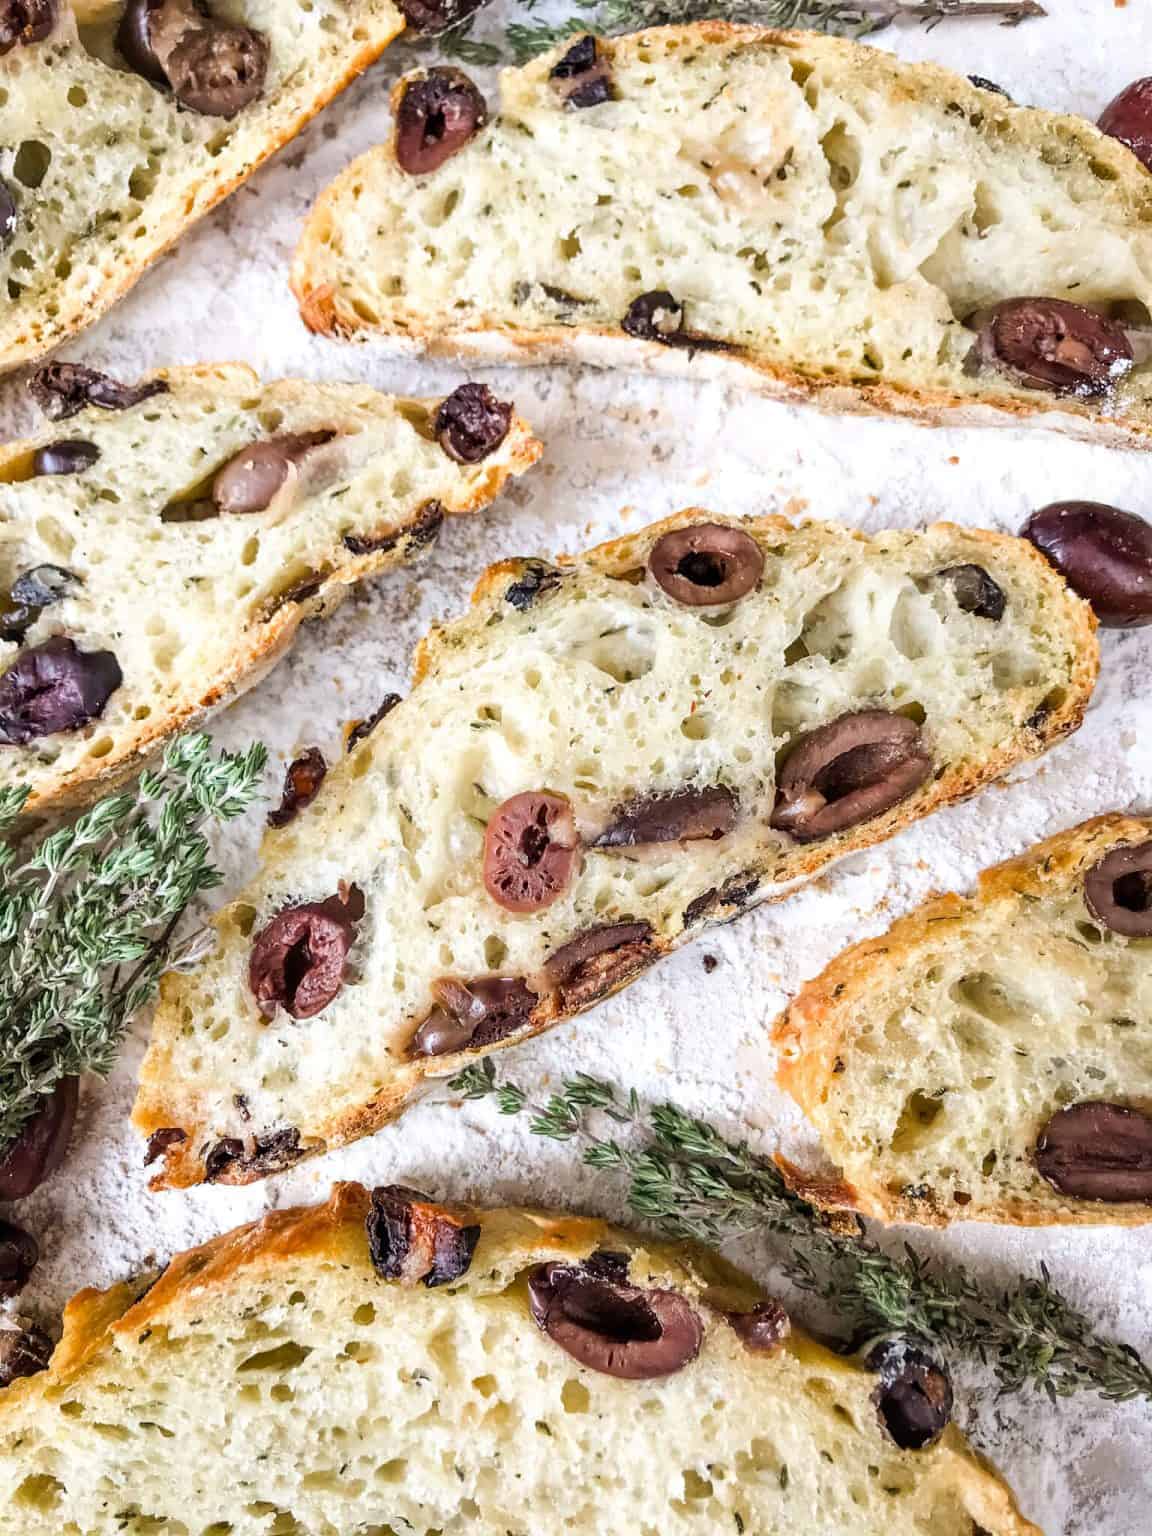 Slices of olive bread spread out / Dutch Oven No Knead Rustic Thyme Olive Bread recipe is a homemade bread filled with kalamata olives and thyme (or rosemary). Simple to make Italian bread. #homemadebread #olivebread #dutchovenbread #nokneadbread
